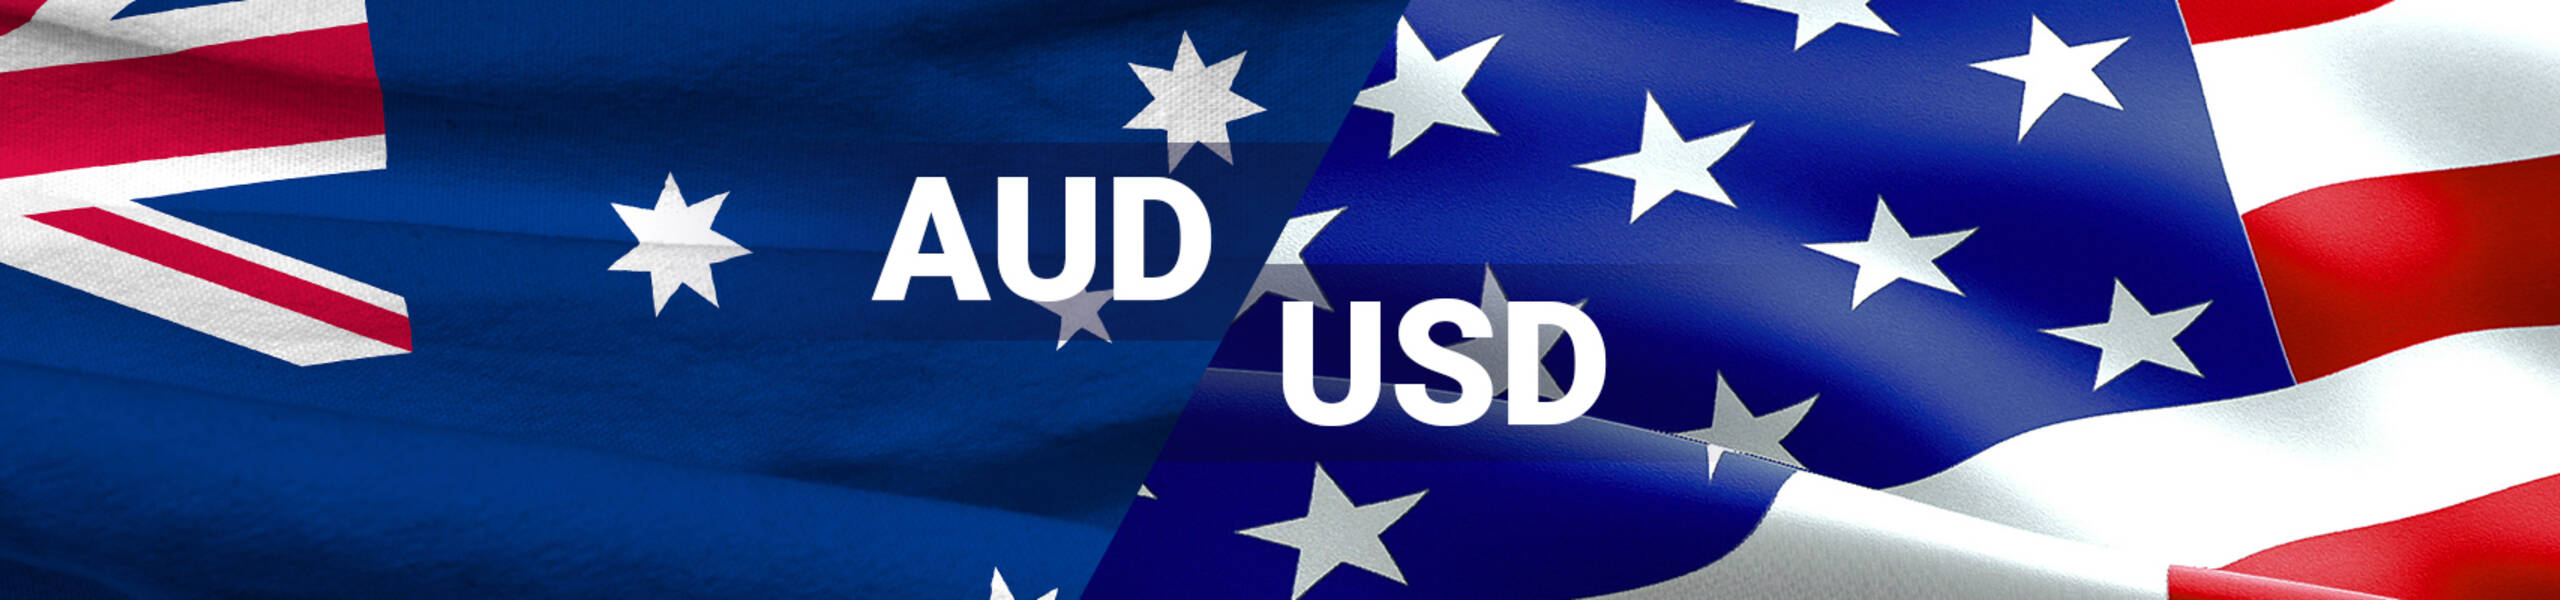 AUD/USD close to a buy opportunity